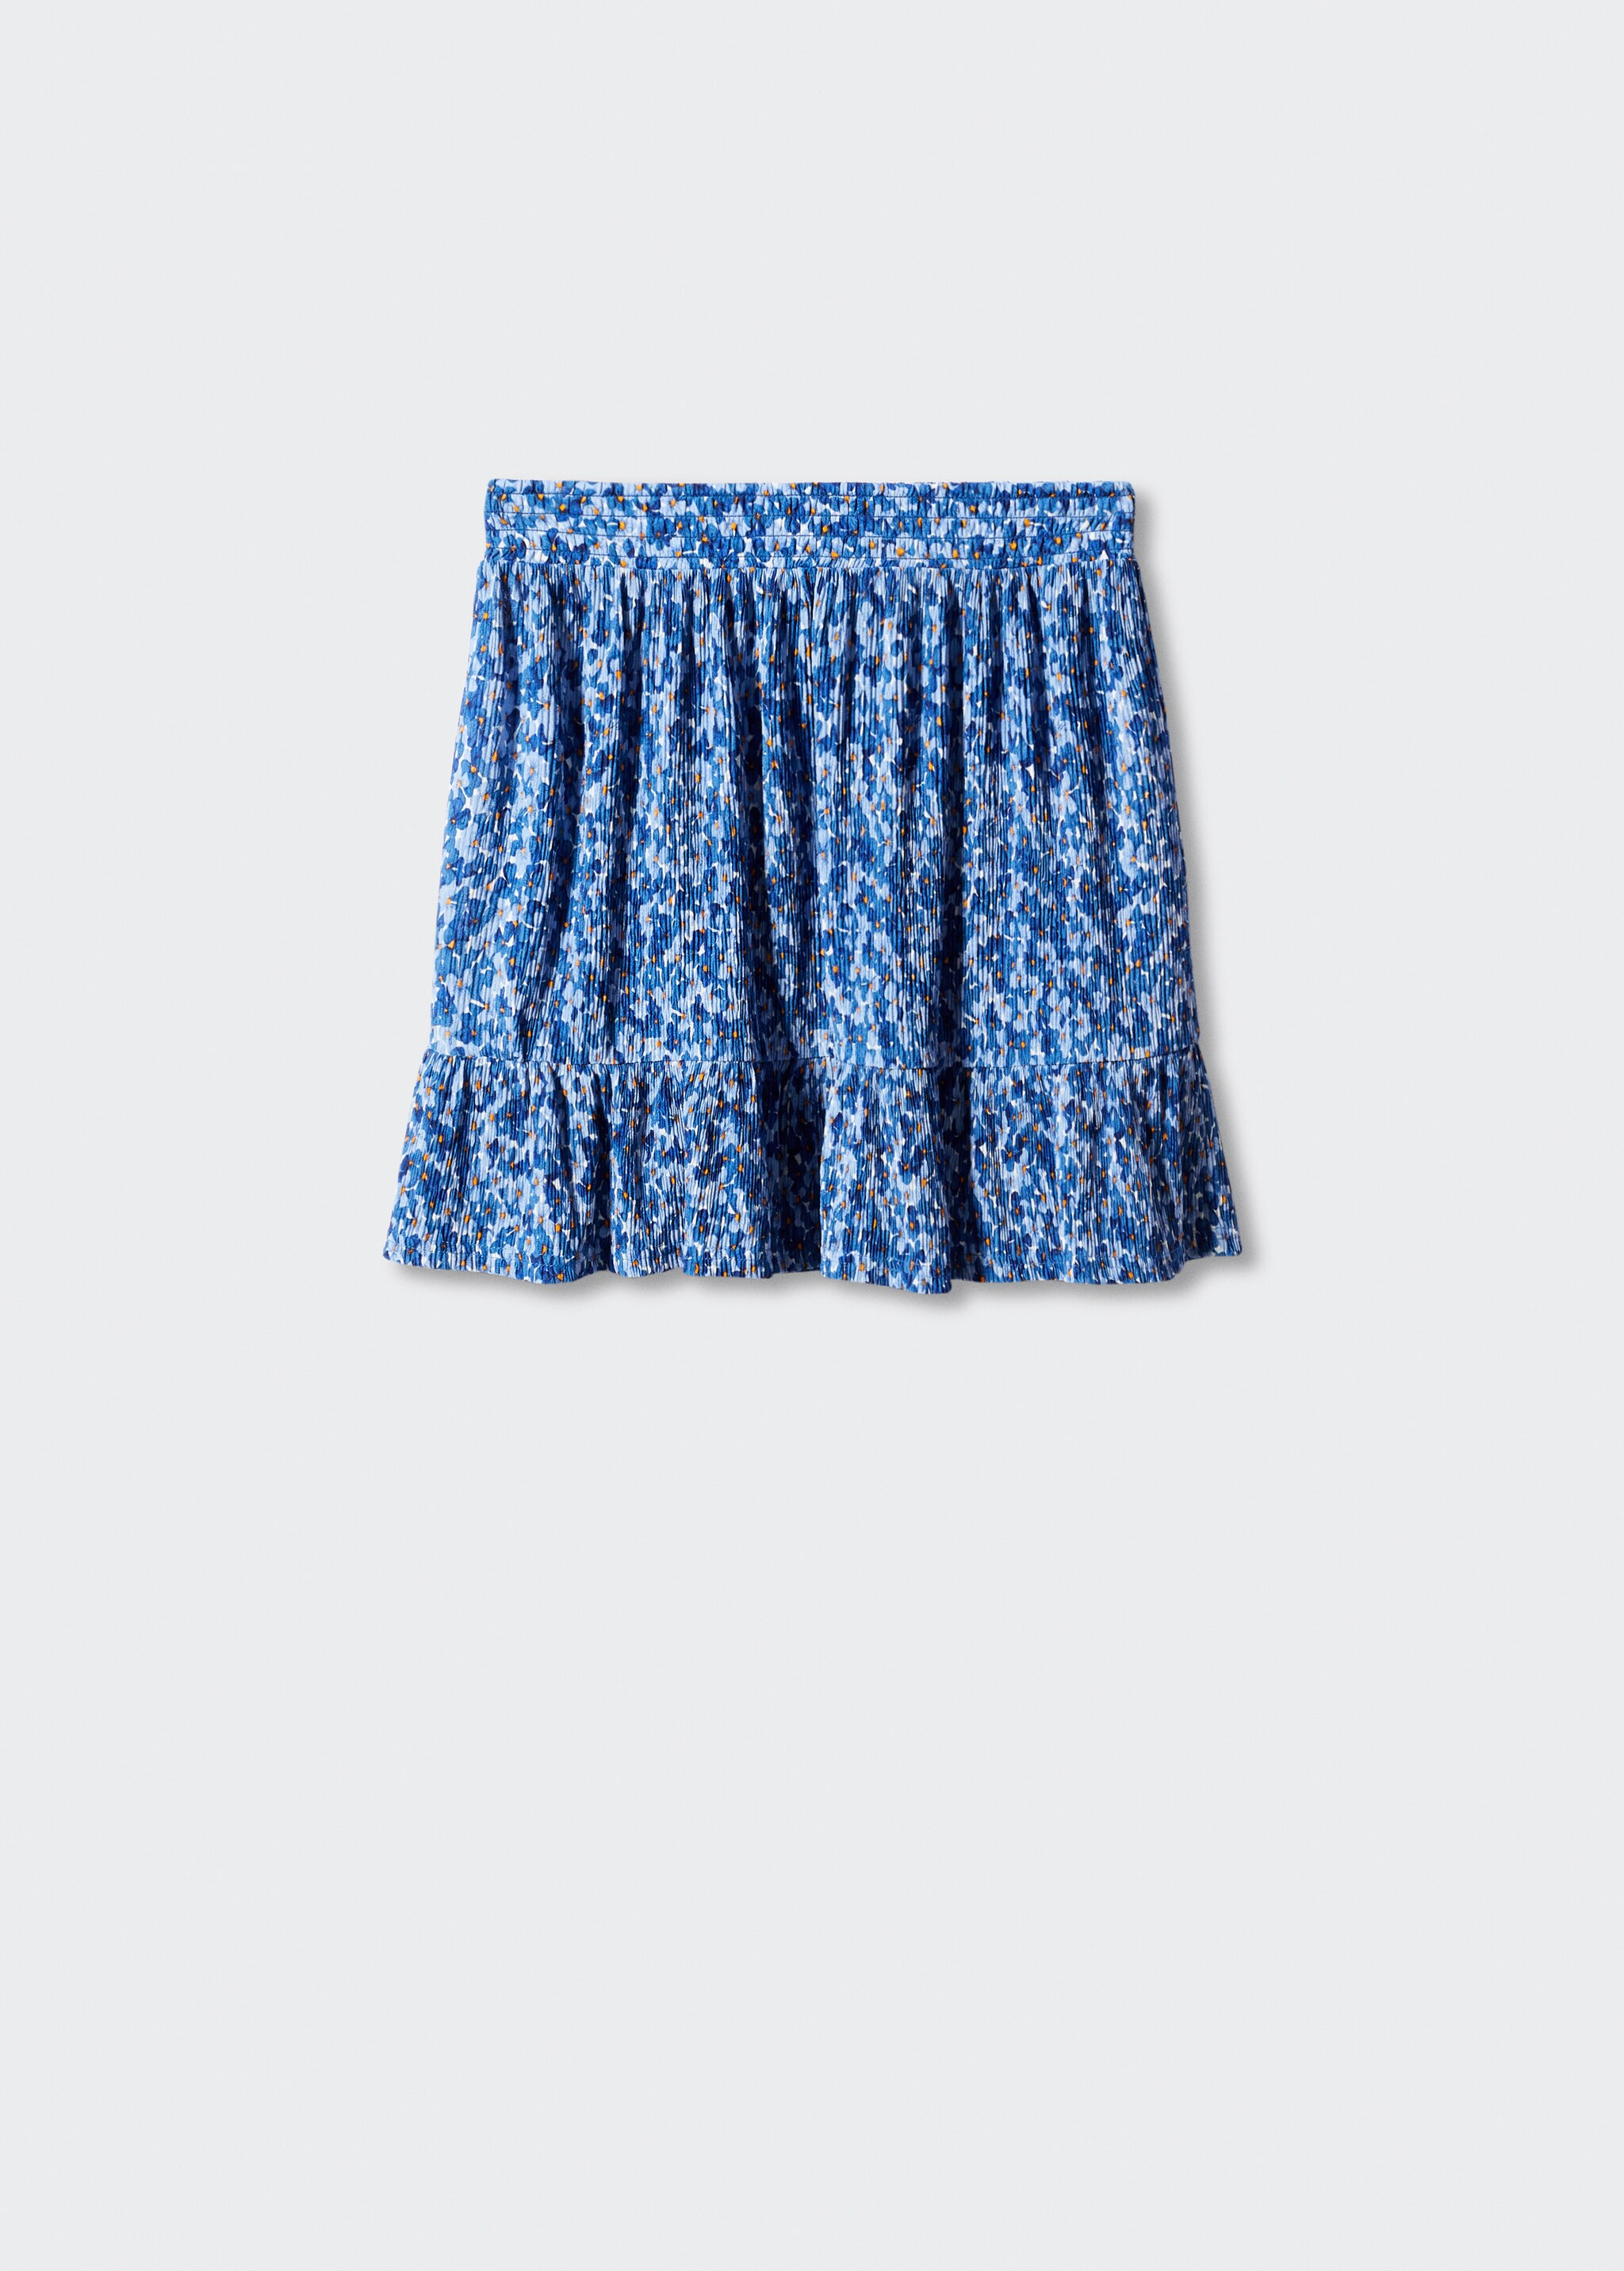 Textured printed skirt - Article without model